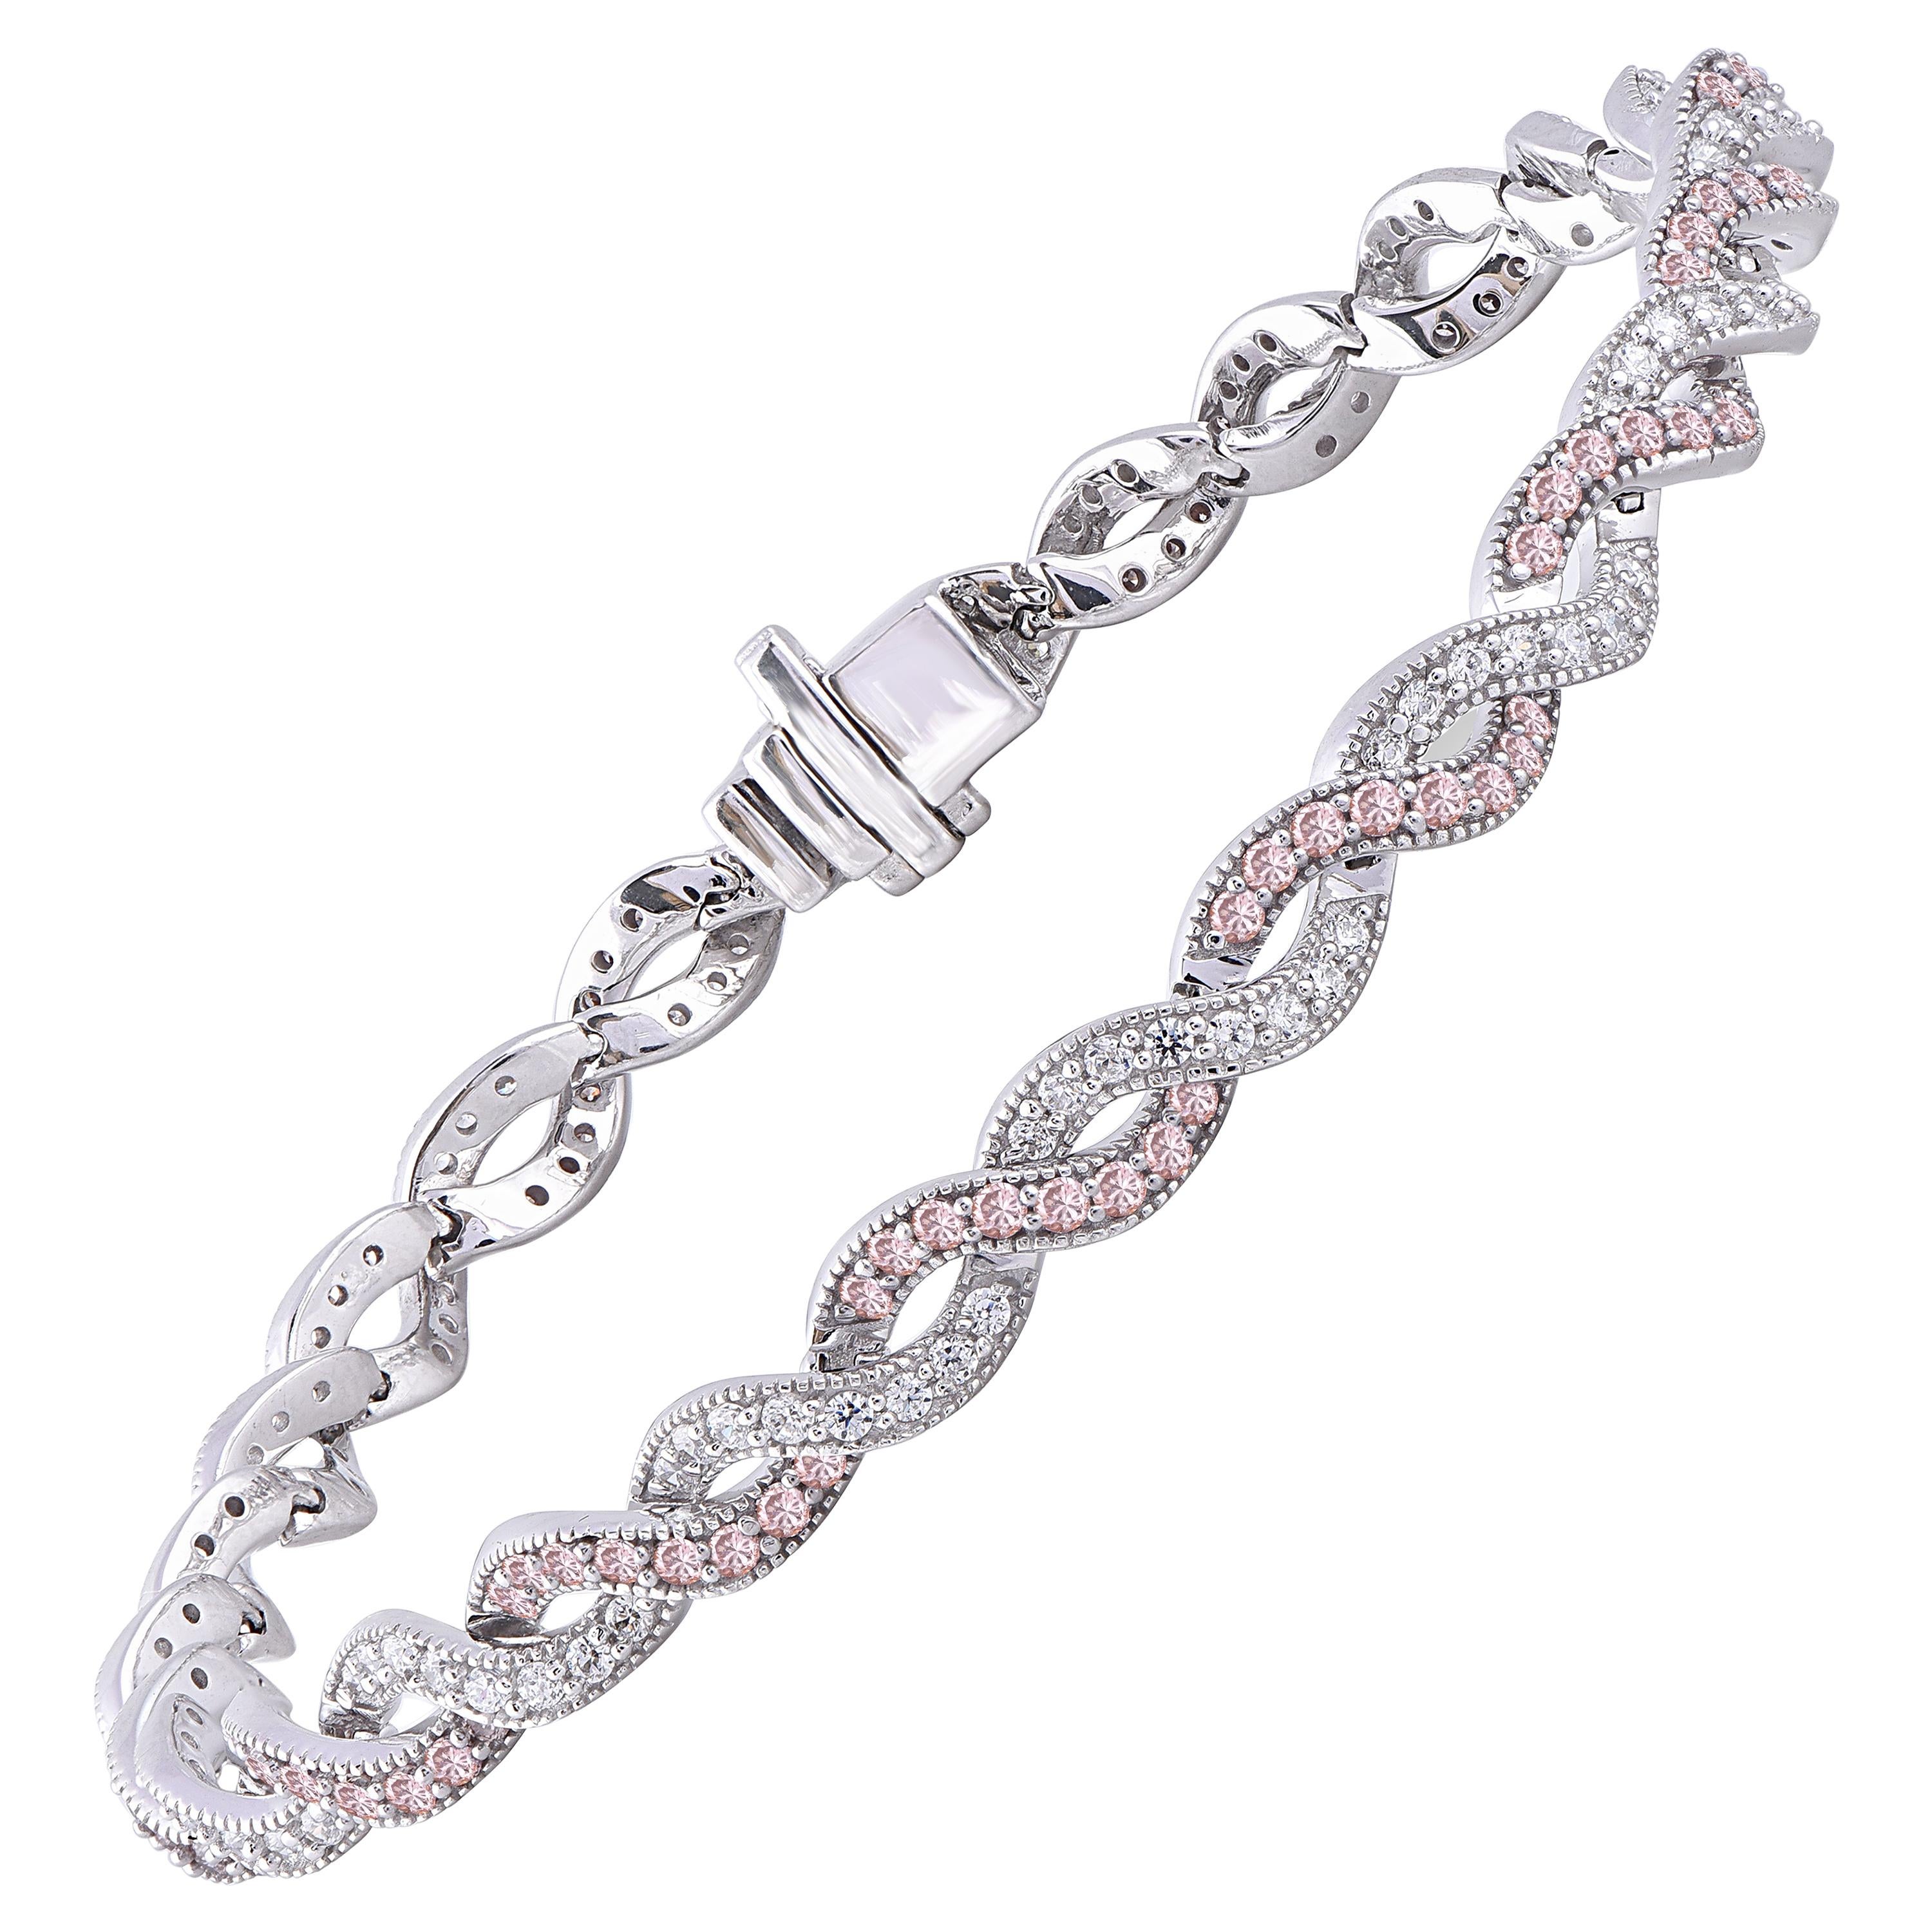 Made in Italy 0.12Ct Diamond Bangle Bracelet in 18KT White Gold Finish Womens